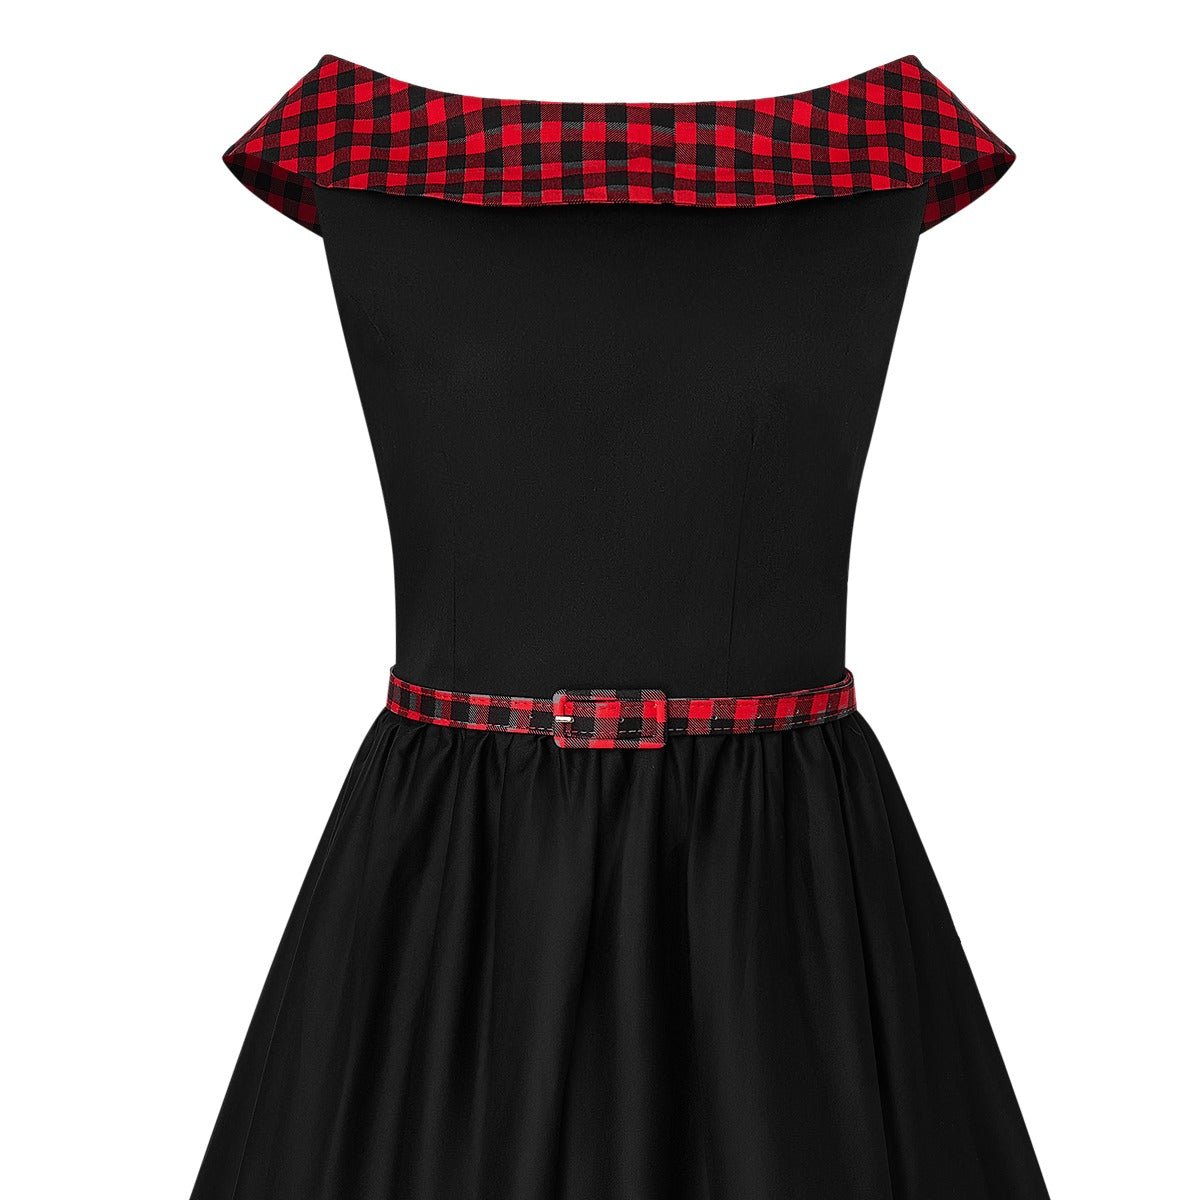 Black swing dress with red tartan 50's roll collar close up